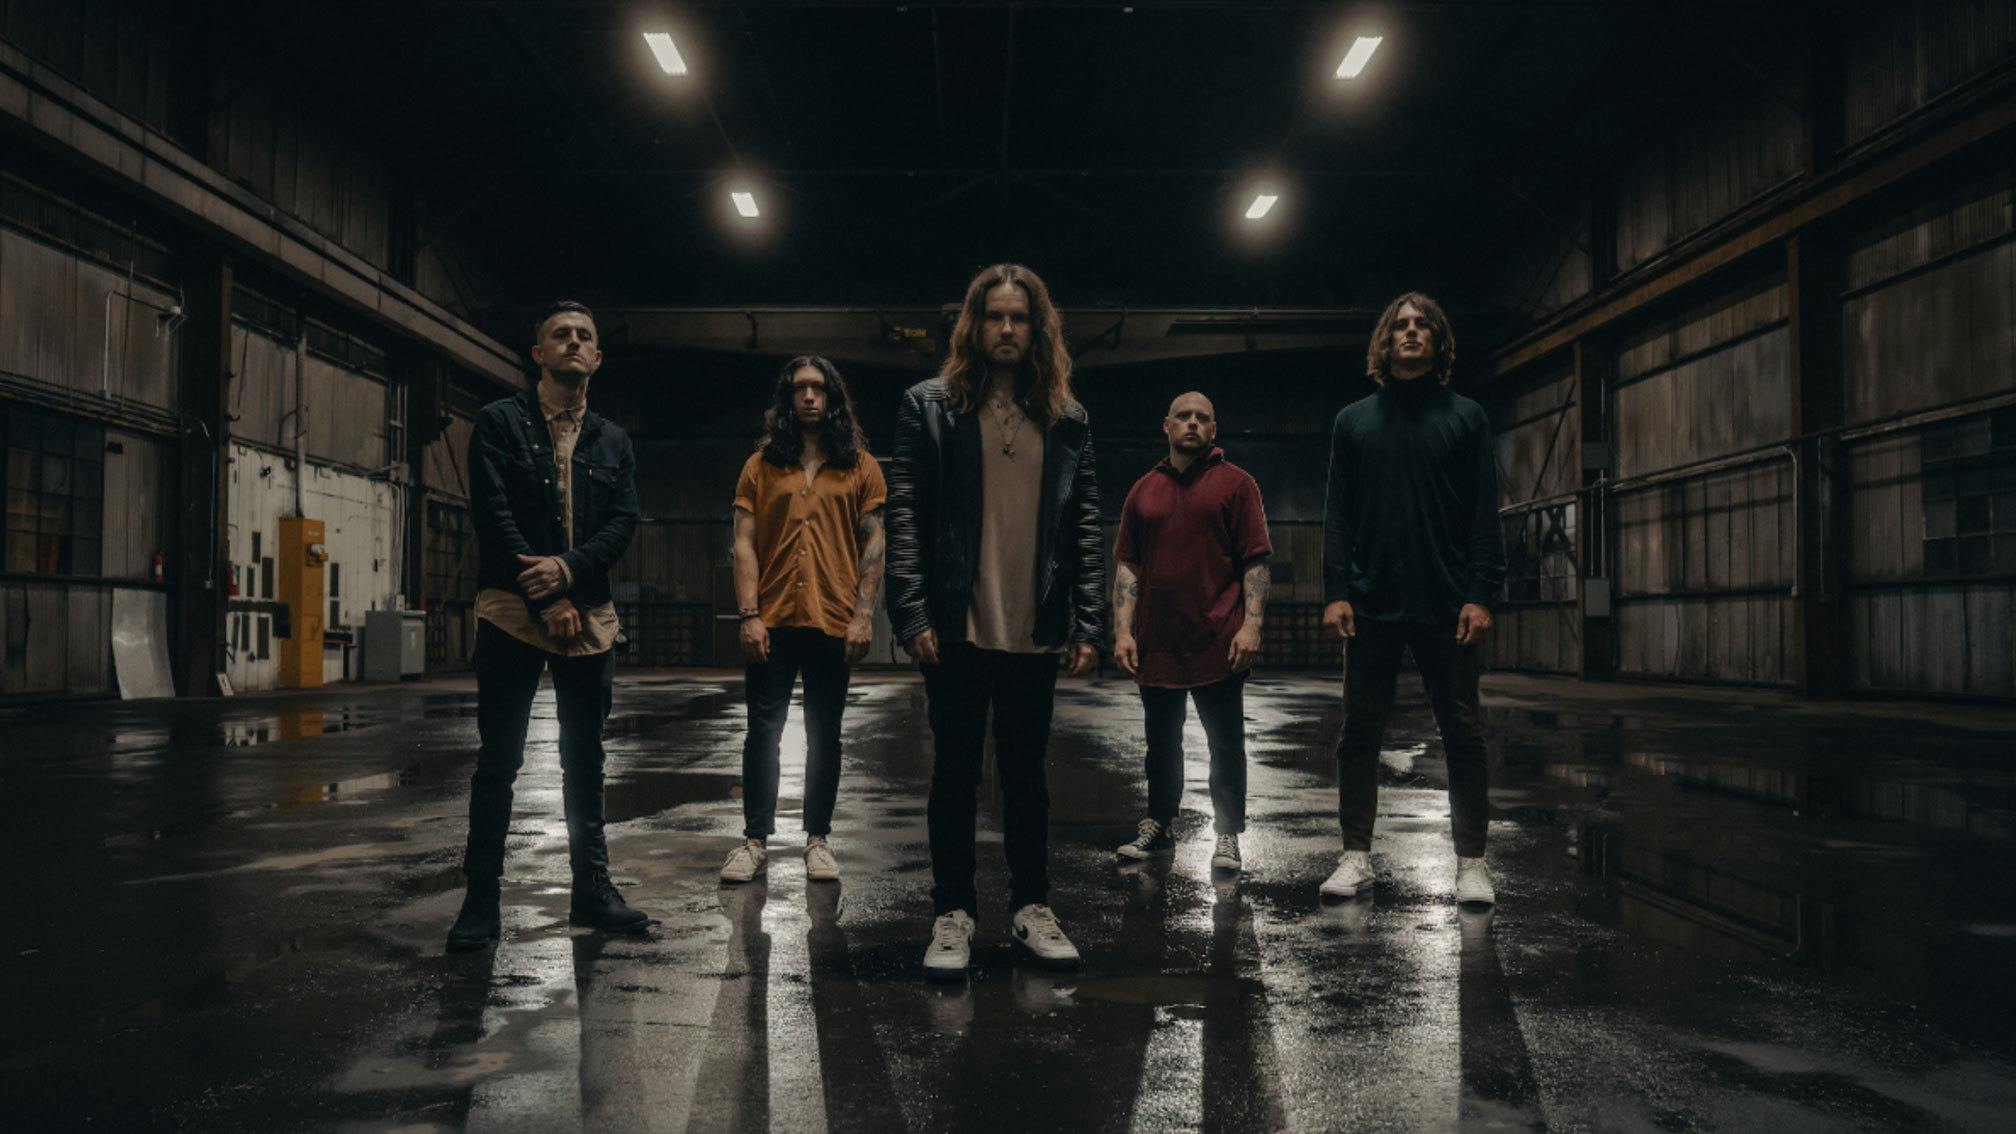 Fit For A King unleash first new single of 2022, Reaper